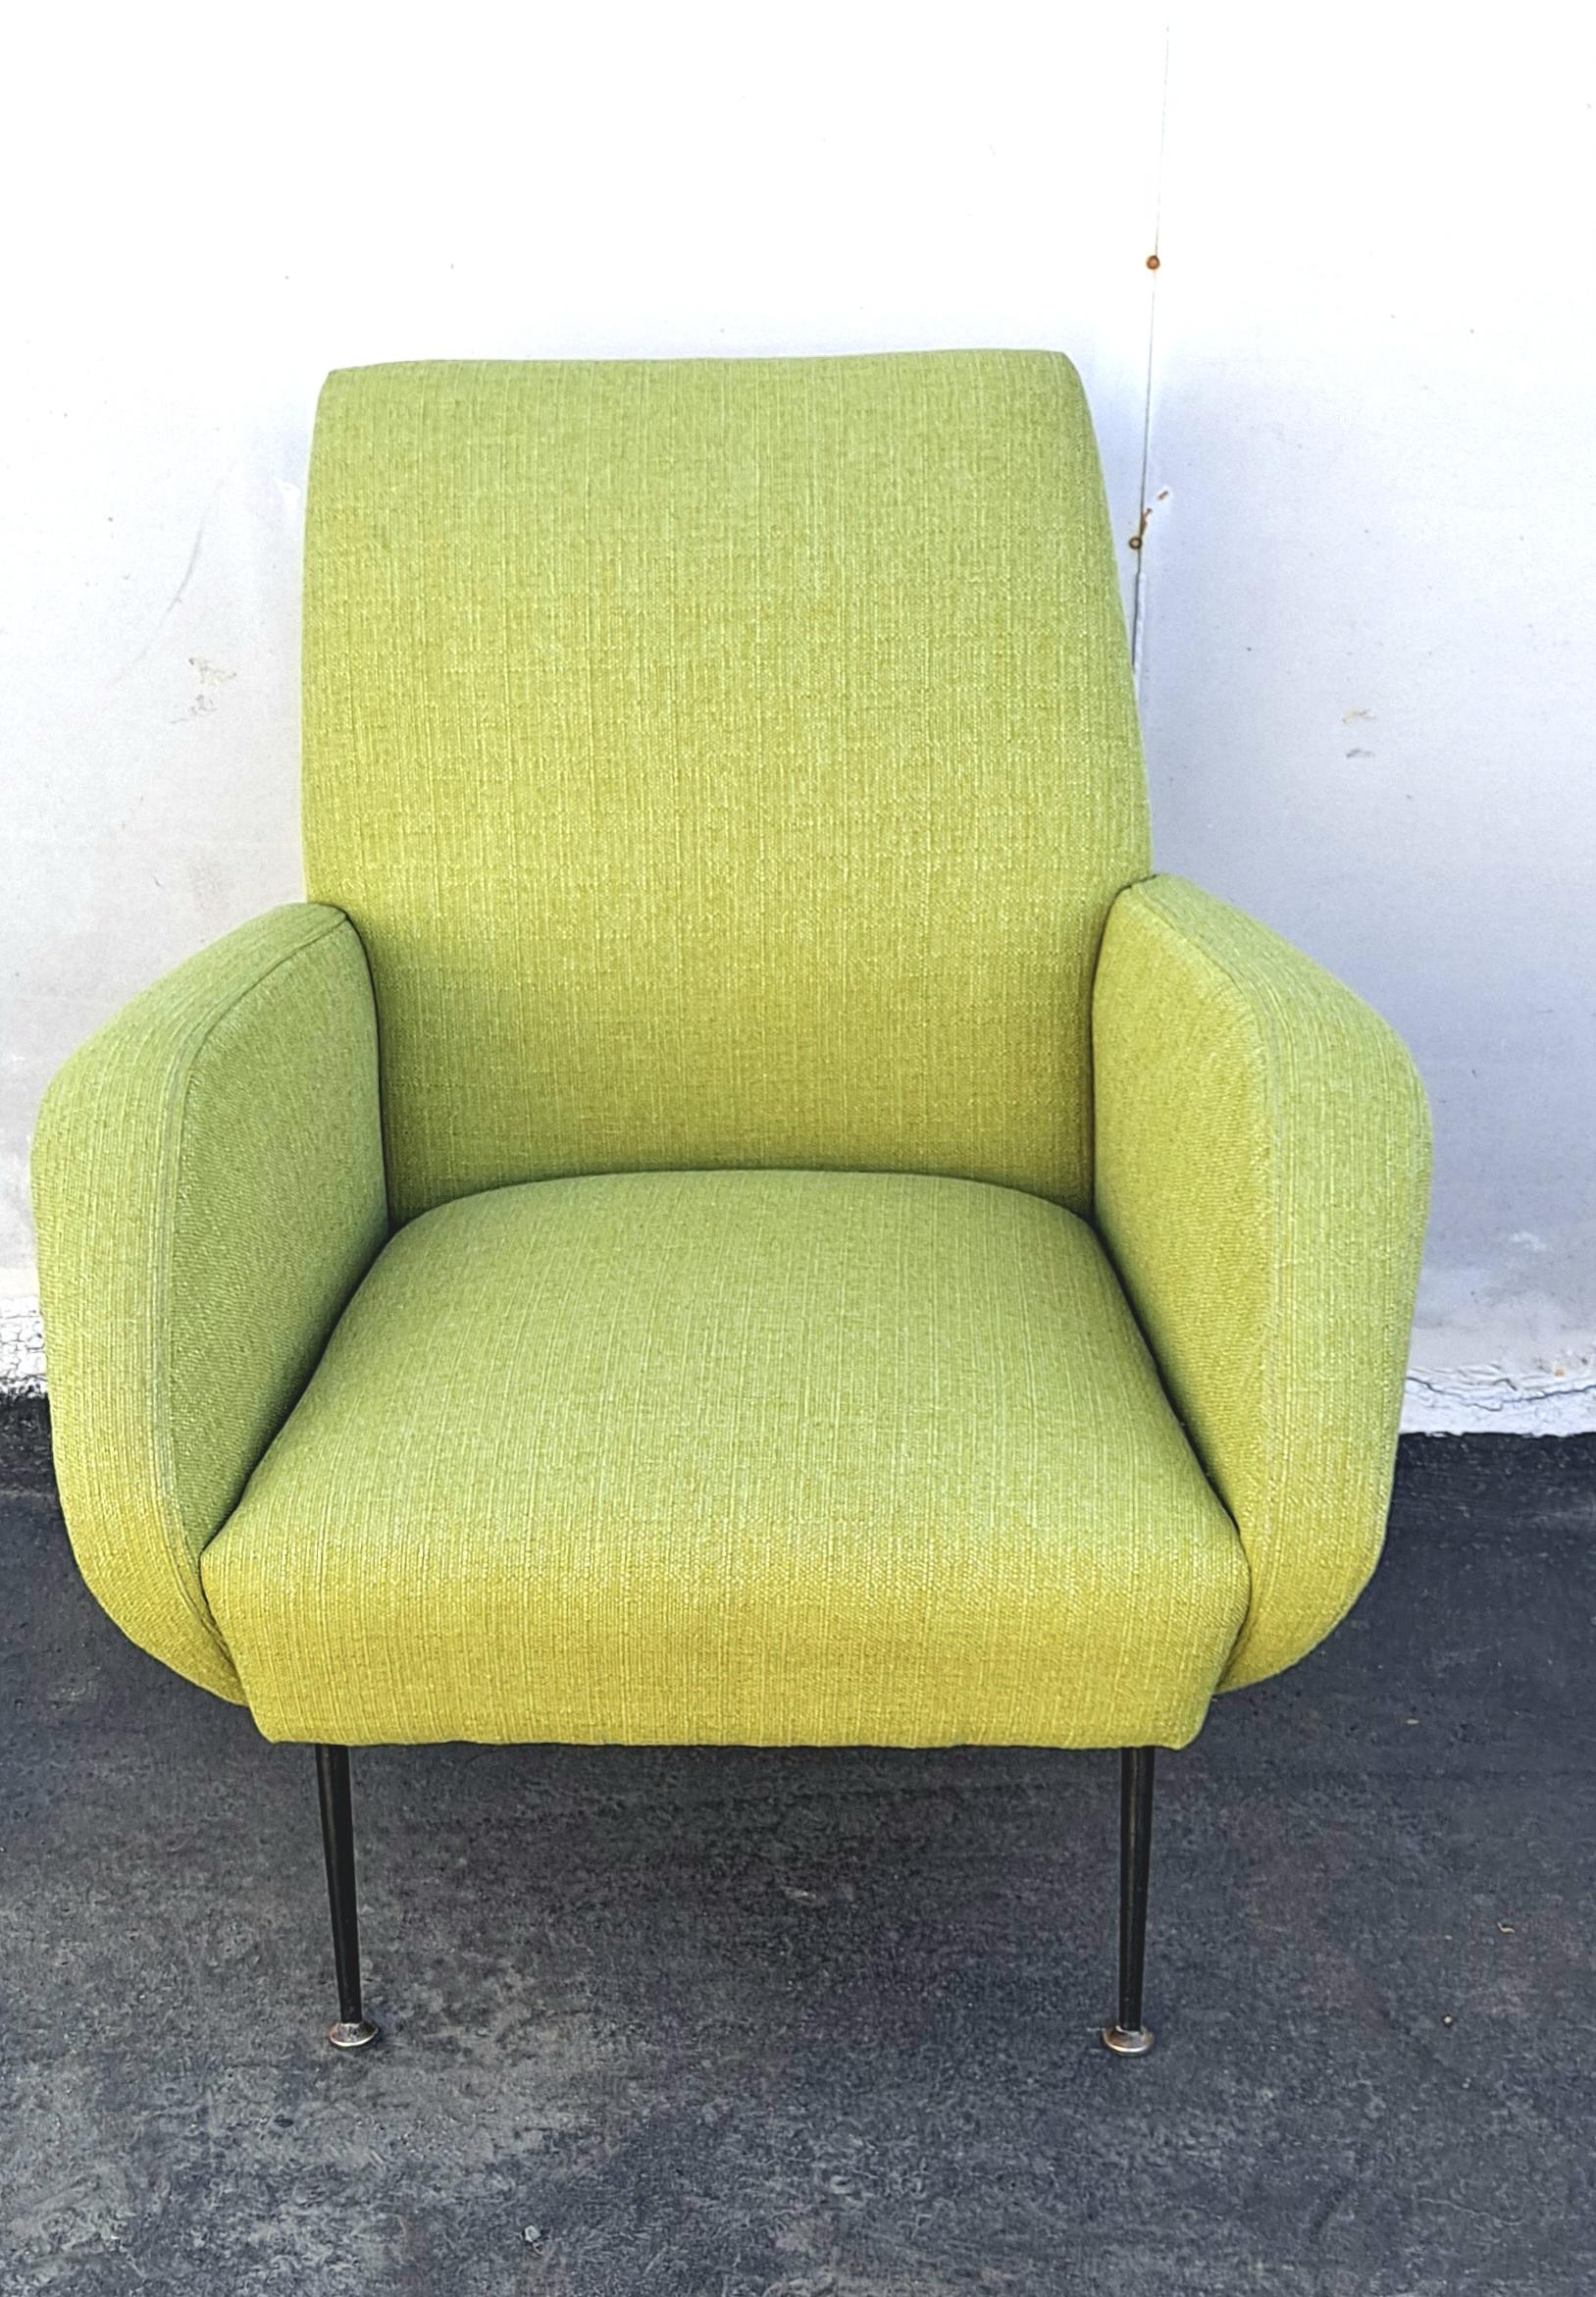 Midcentury Italian chair new reupholstered and refinished. Upholstered in linen and cotton upholstery material.